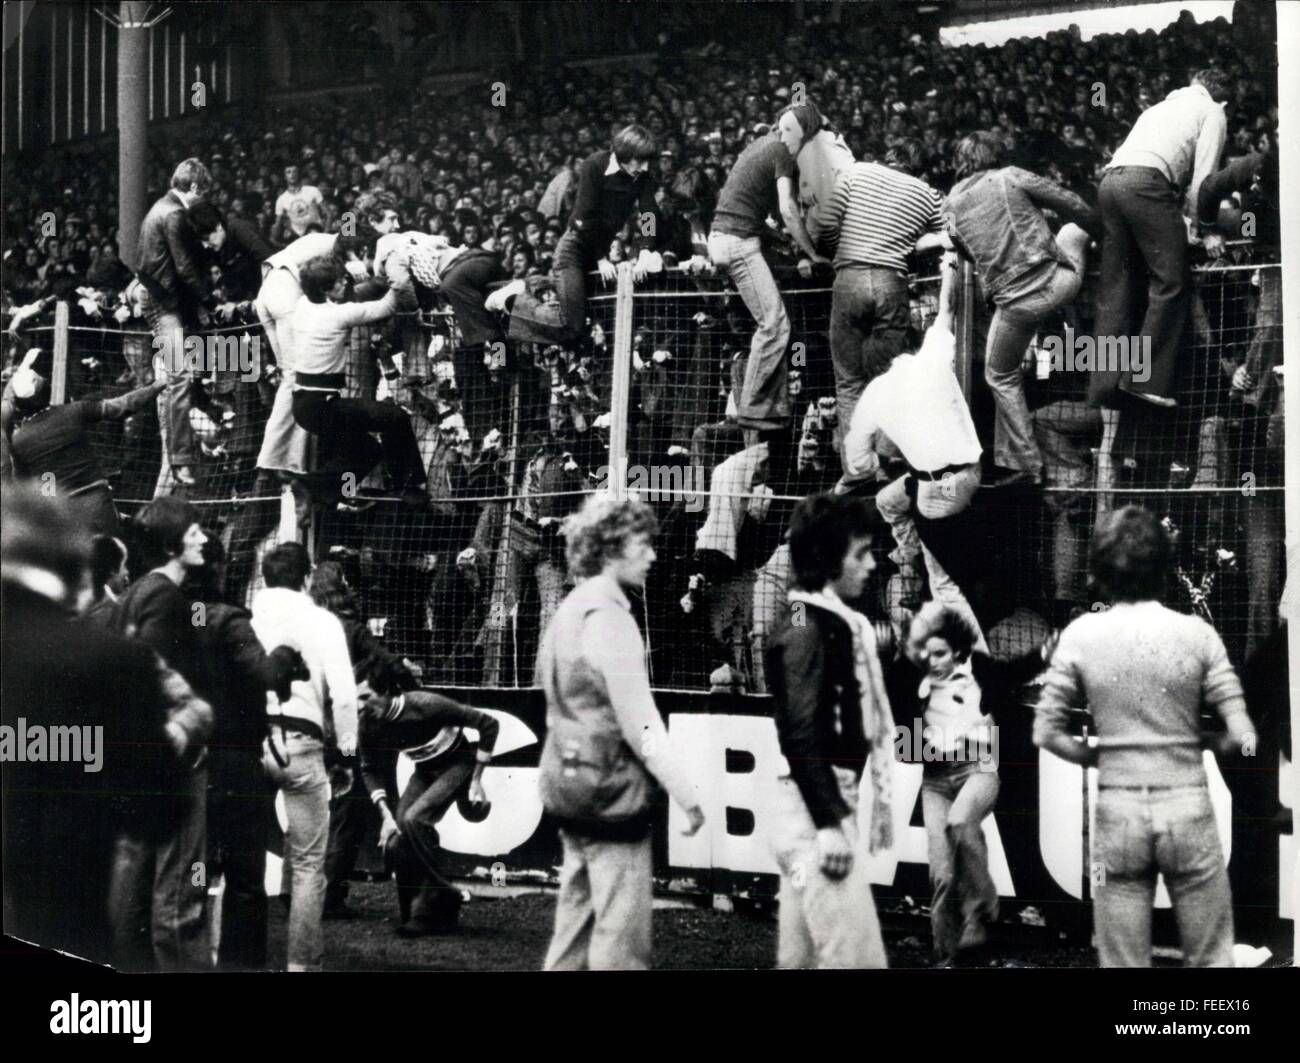 1973 - Manchester United Barred From Europe: Owing to the violent rioting by the Manchester United supporters in the match between Manchester United and St. Etienne they have been suspended by Union of European Football Association. Photo Shows: Rioting fans climb over the barriers during the match in France. © Keystone Pictures USA/ZUMAPRESS.com/Alamy Live News Stock Photo